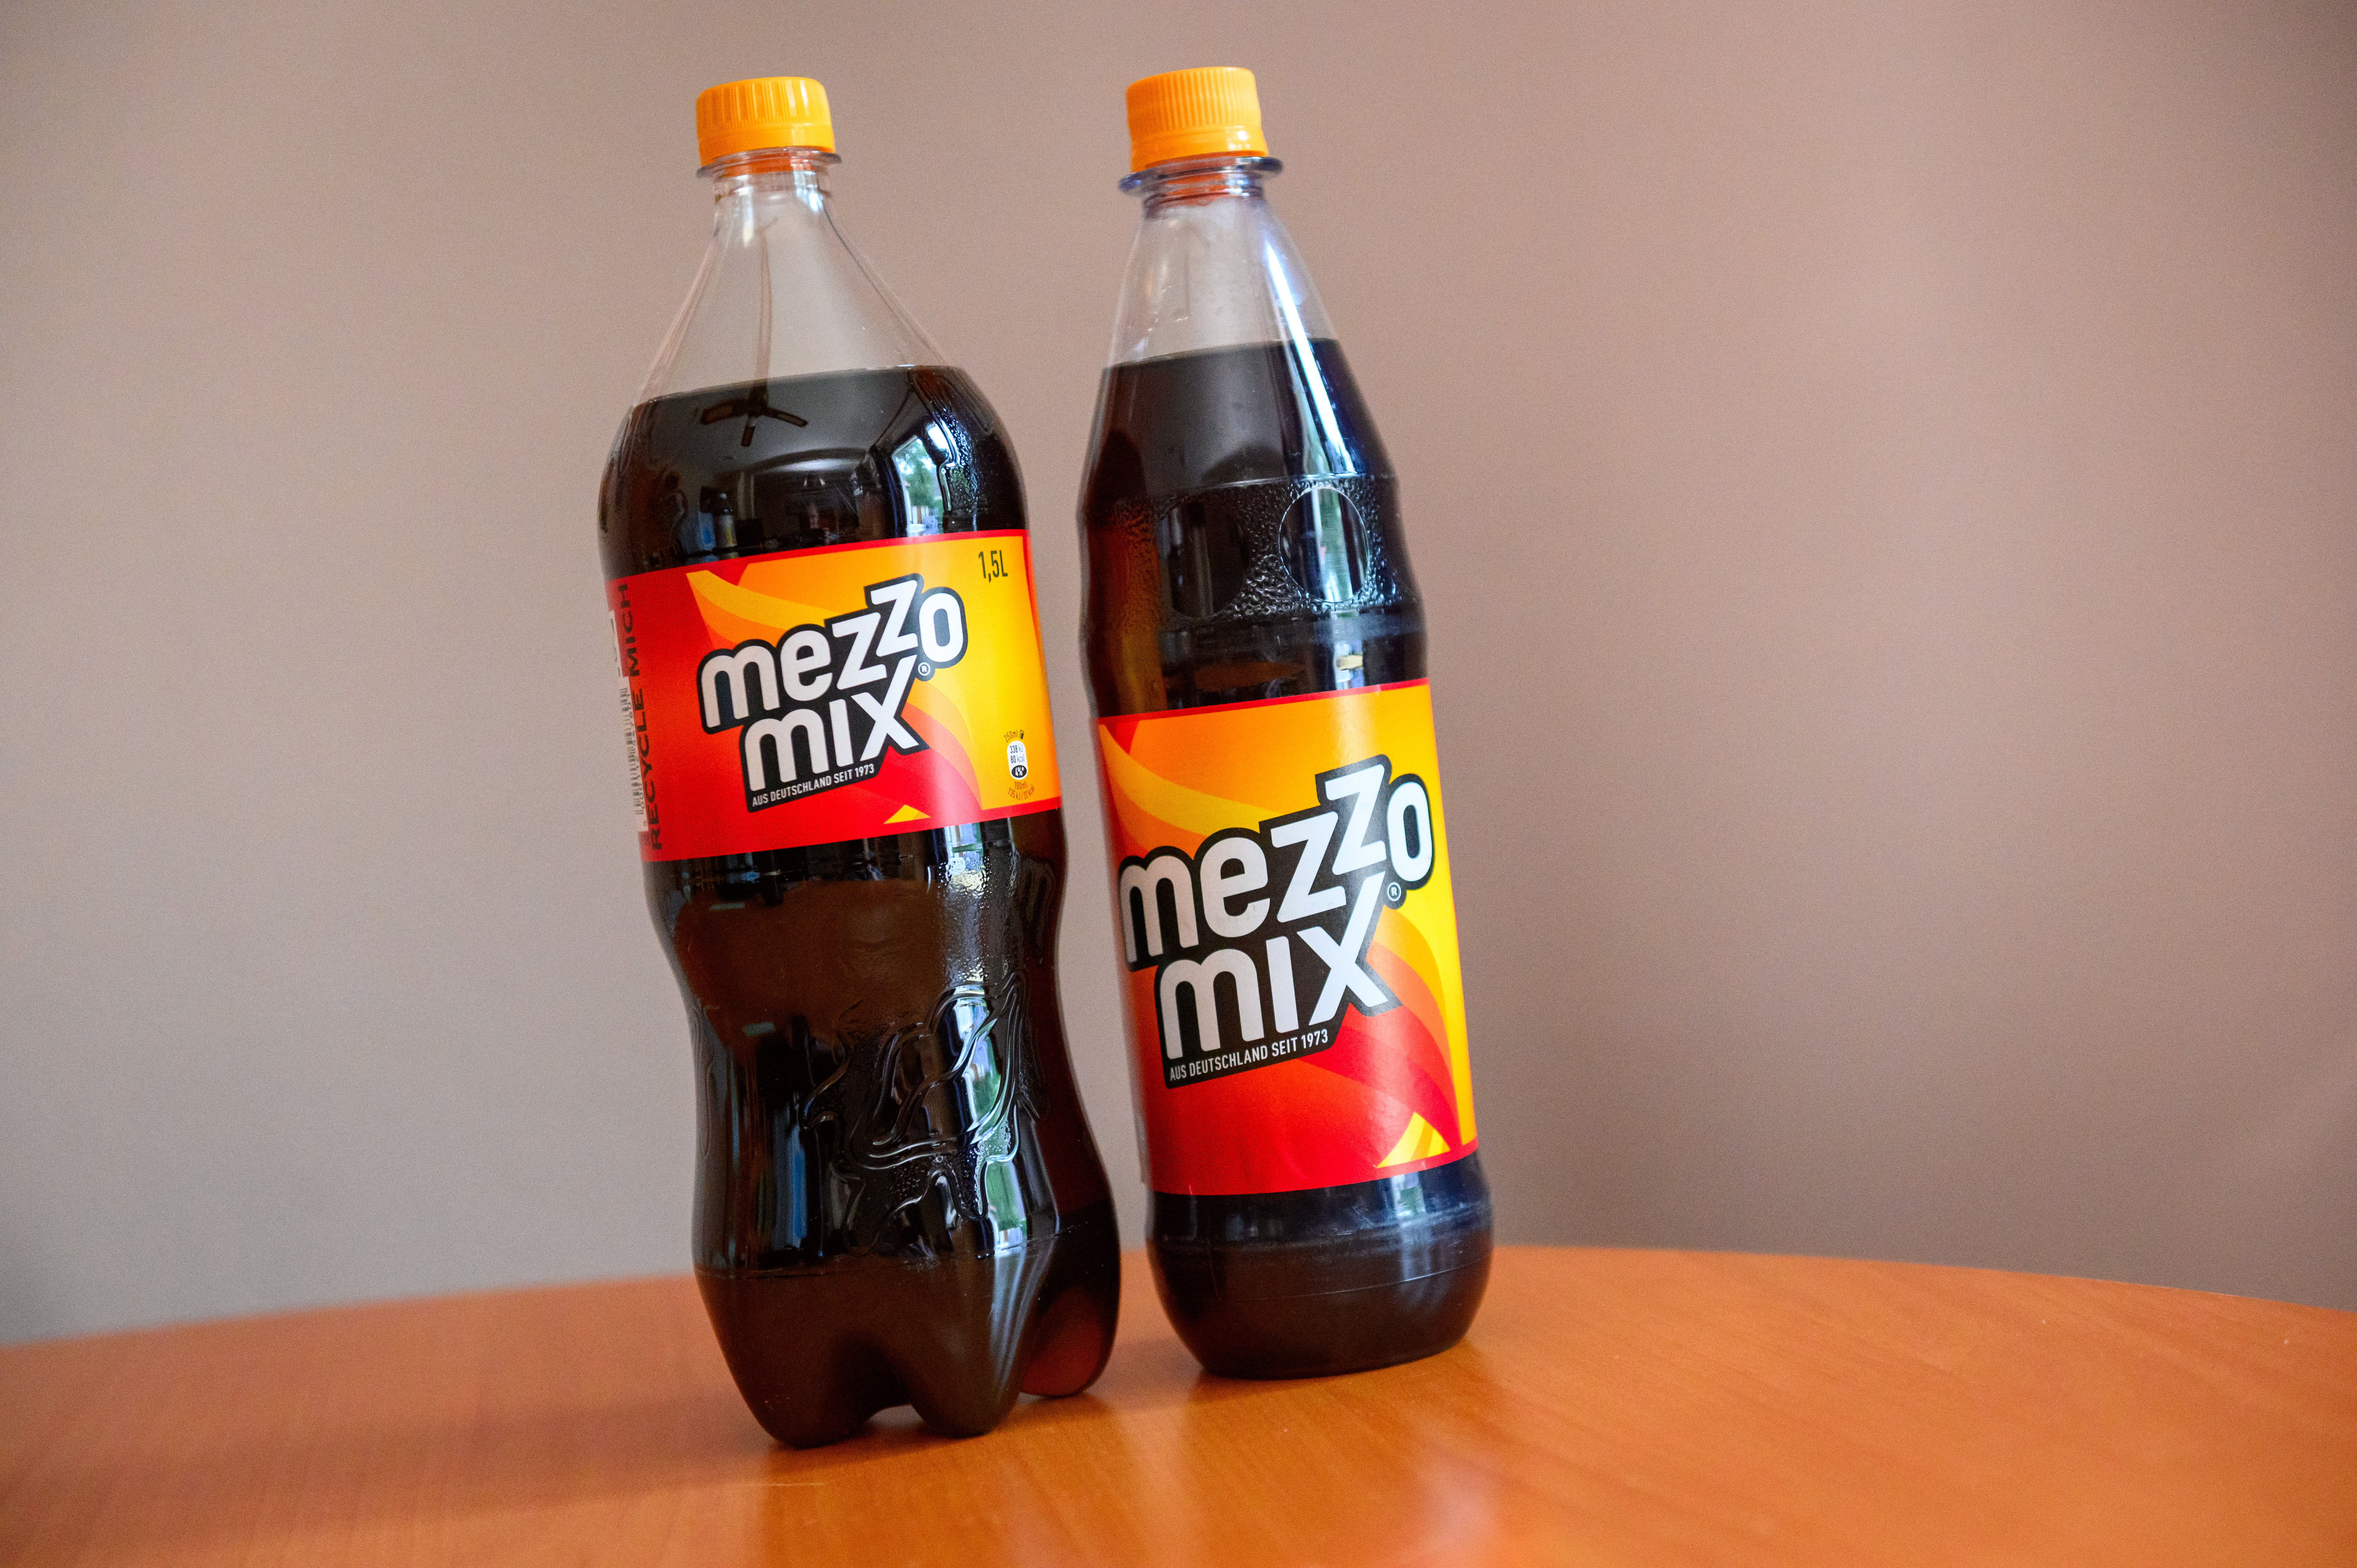 Two bottles of Mezzo Mix sit on a table